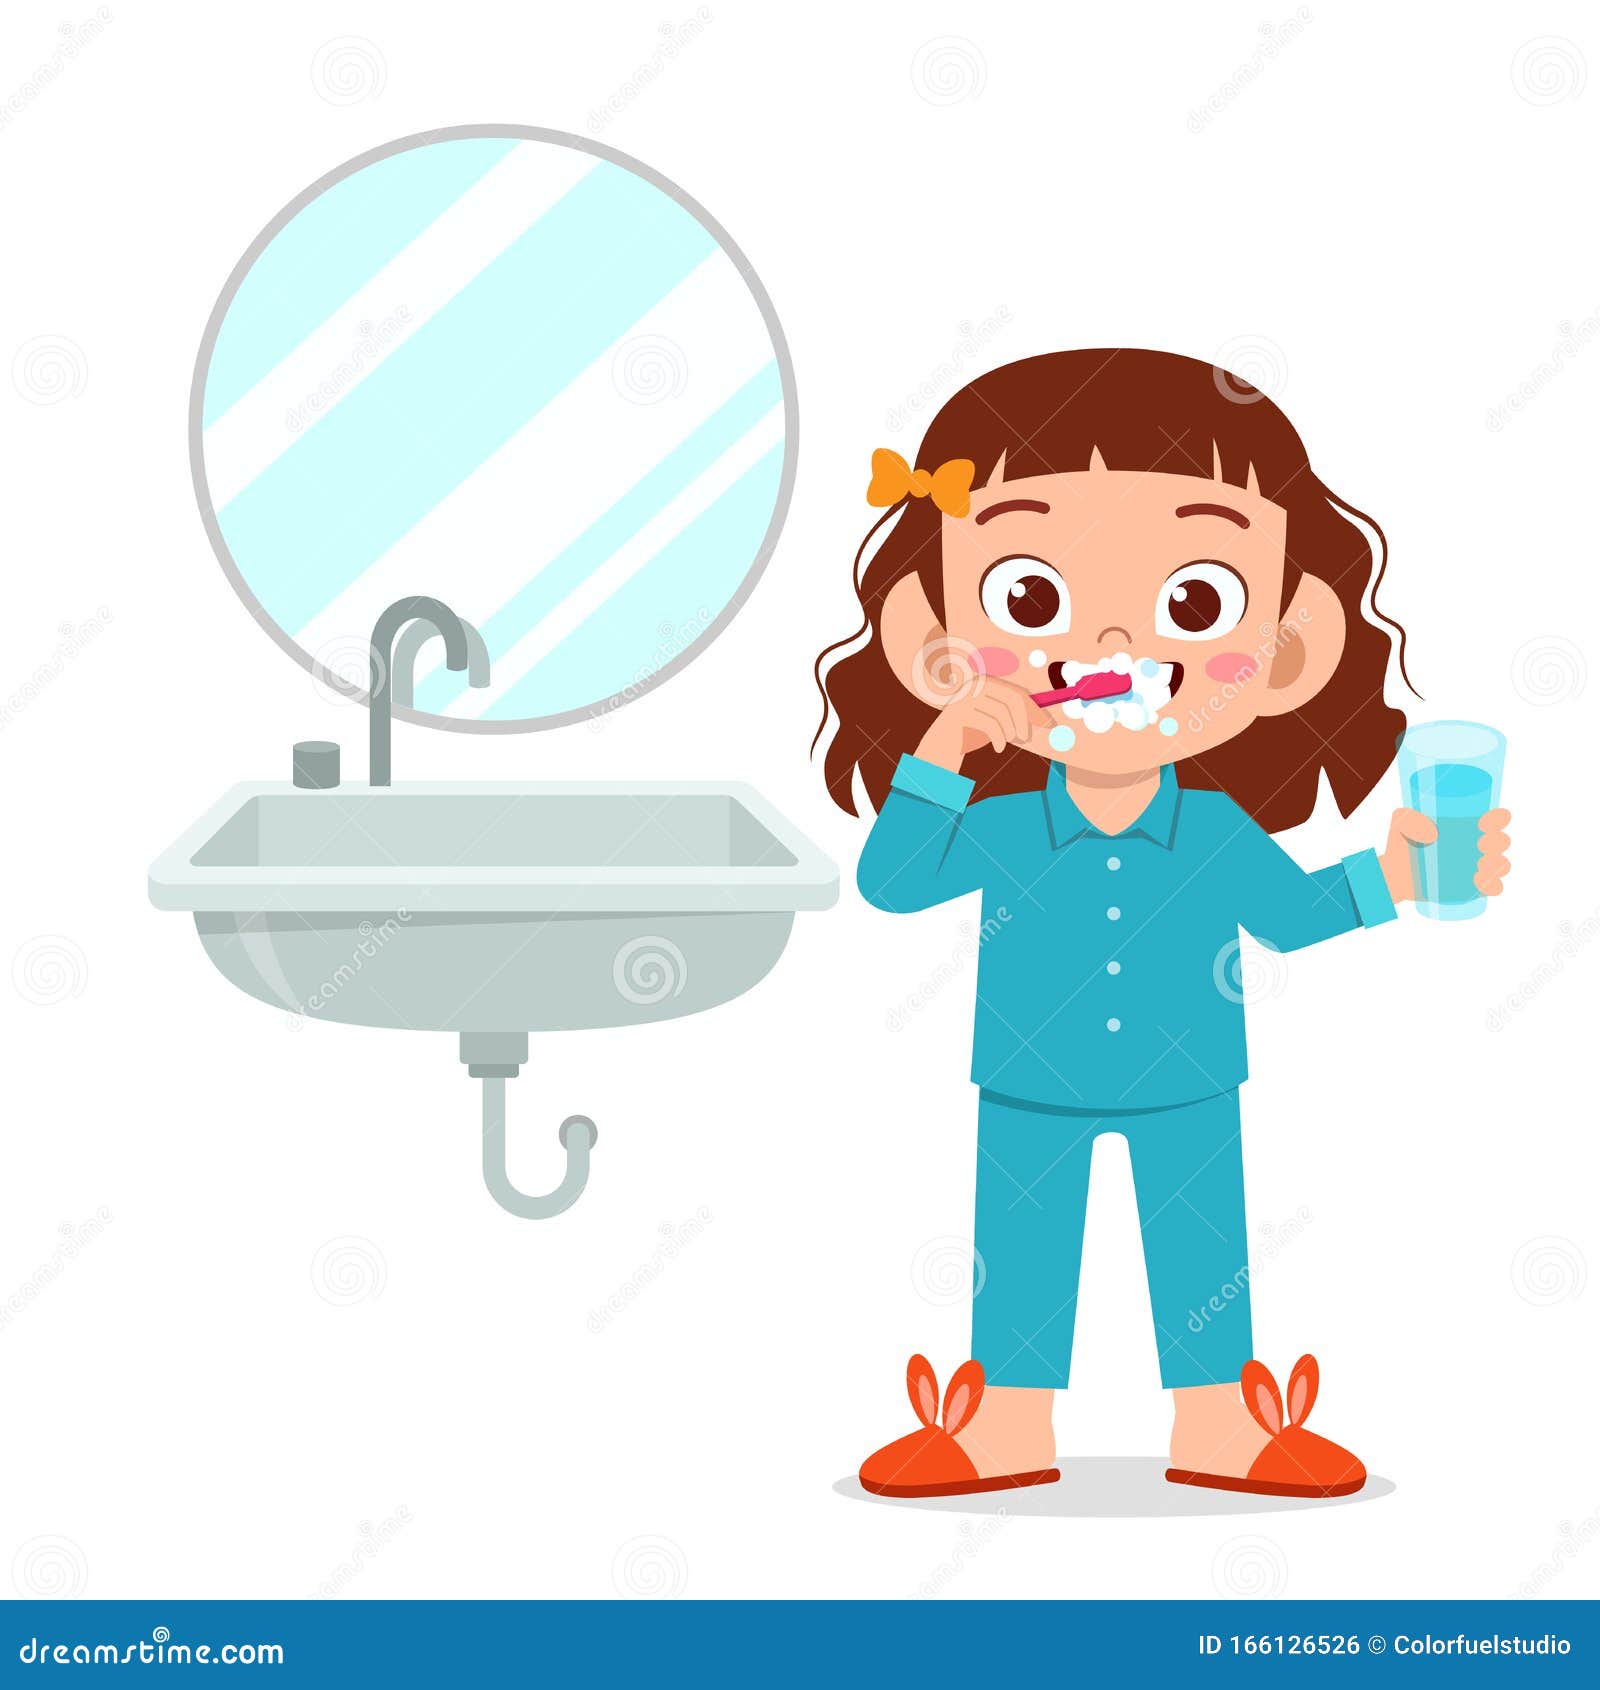 Someone Brushing Their Teeth Clipart Images